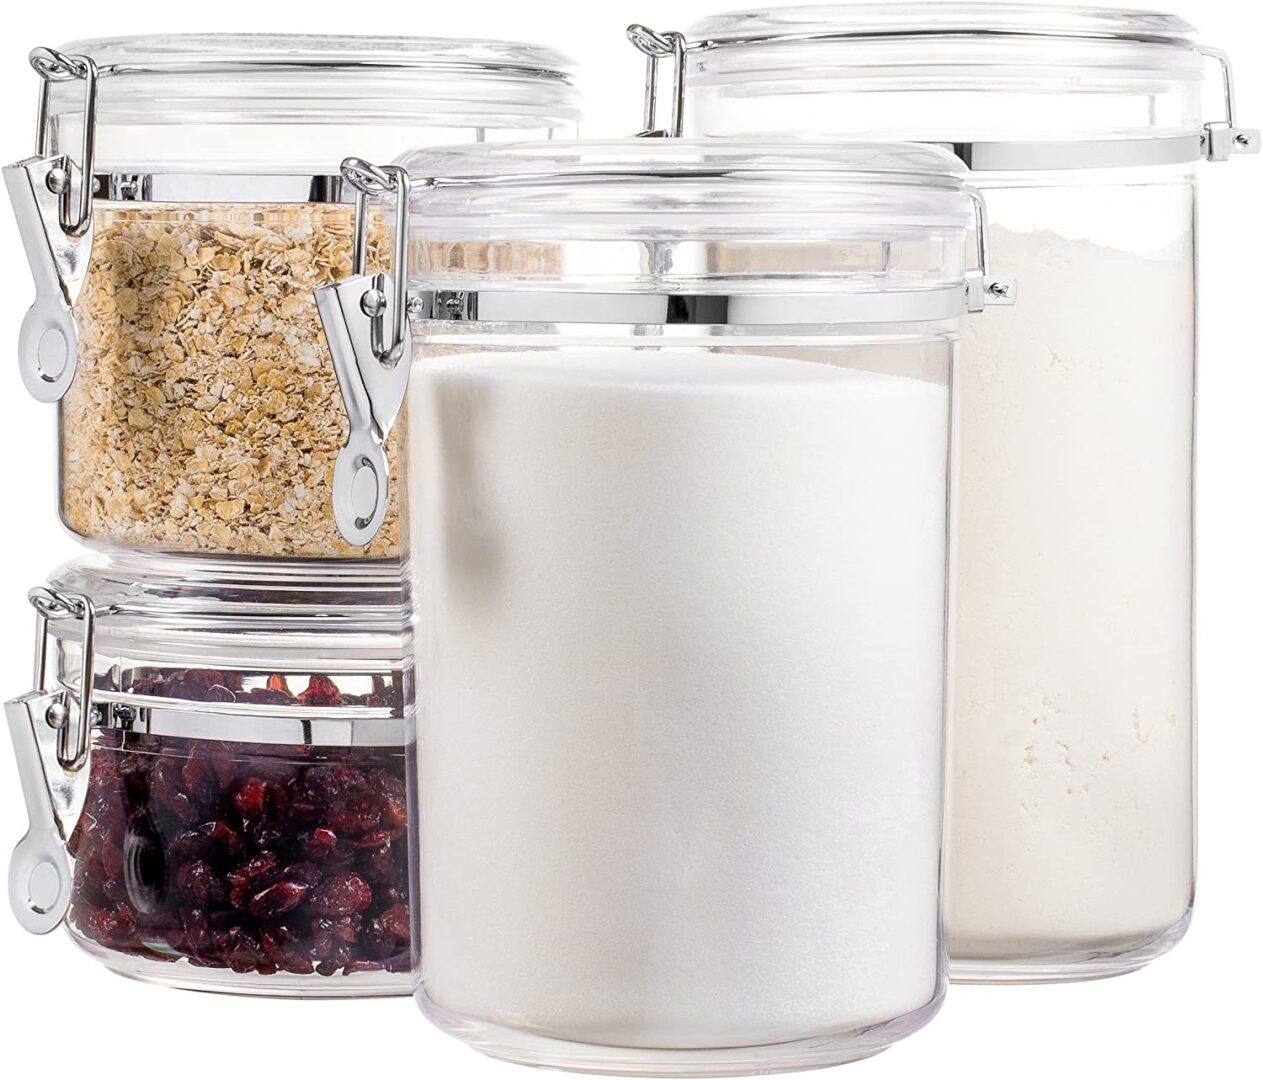 Transparent containers with different contents